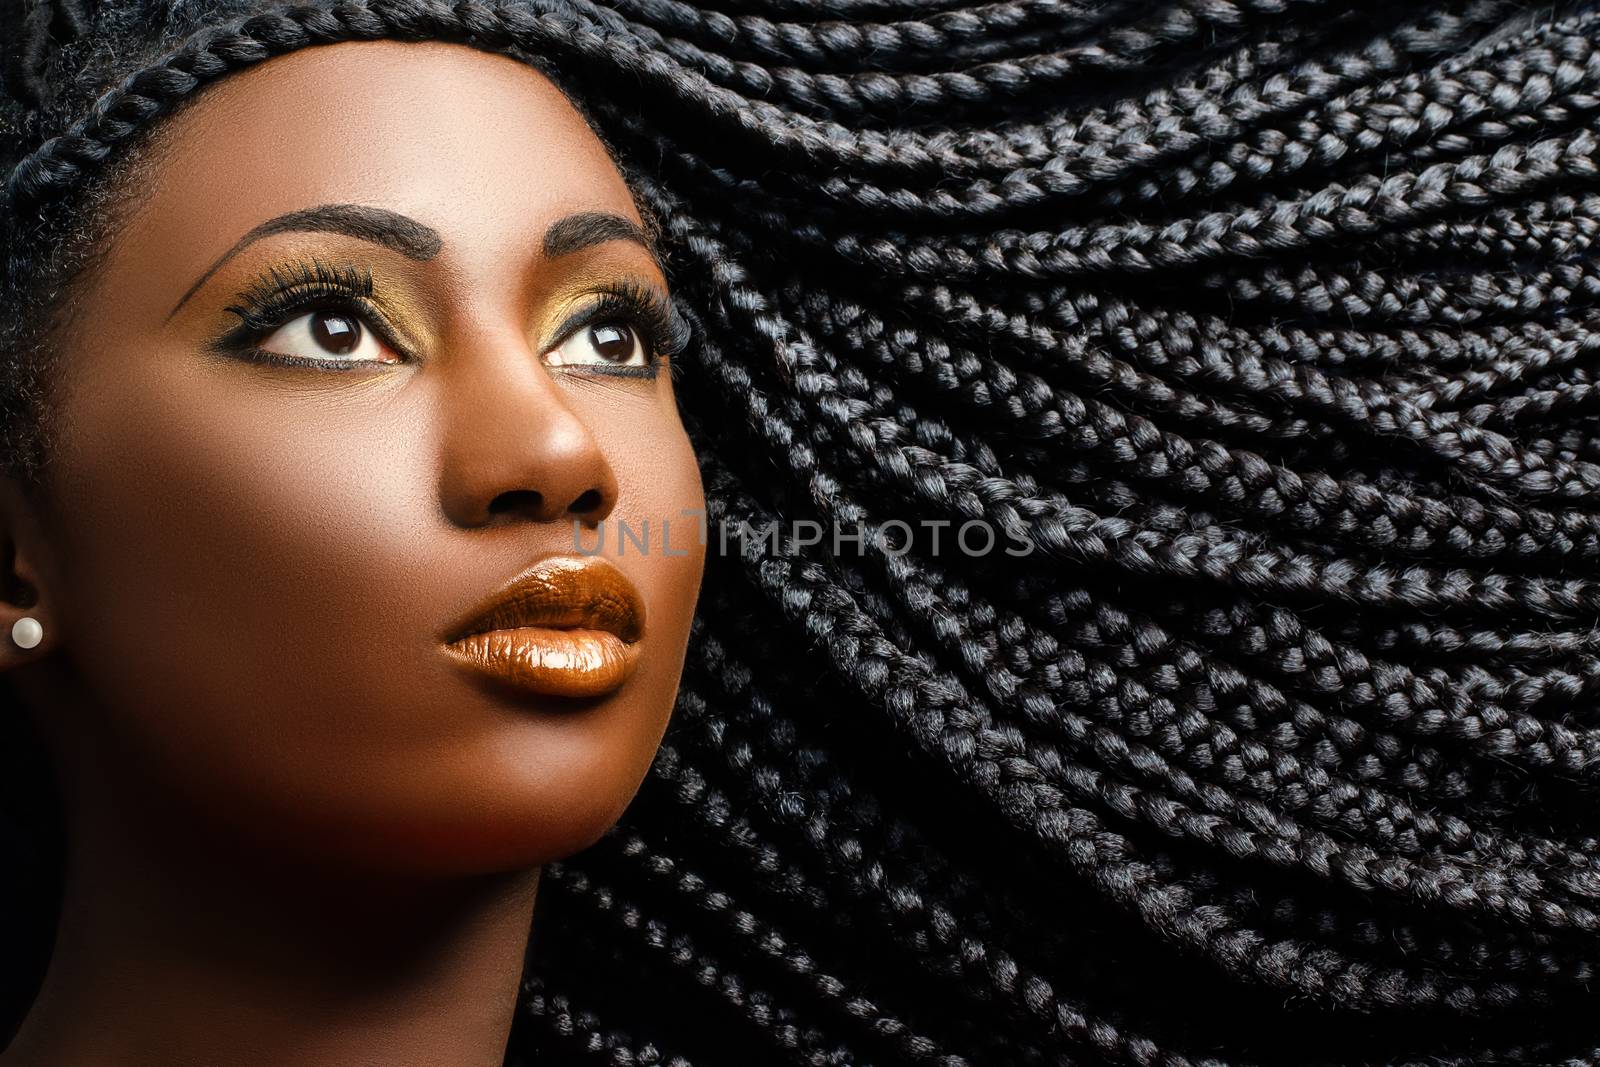 Close up cosmetic beauty portrait of african woman showing long black braided hairstyle.